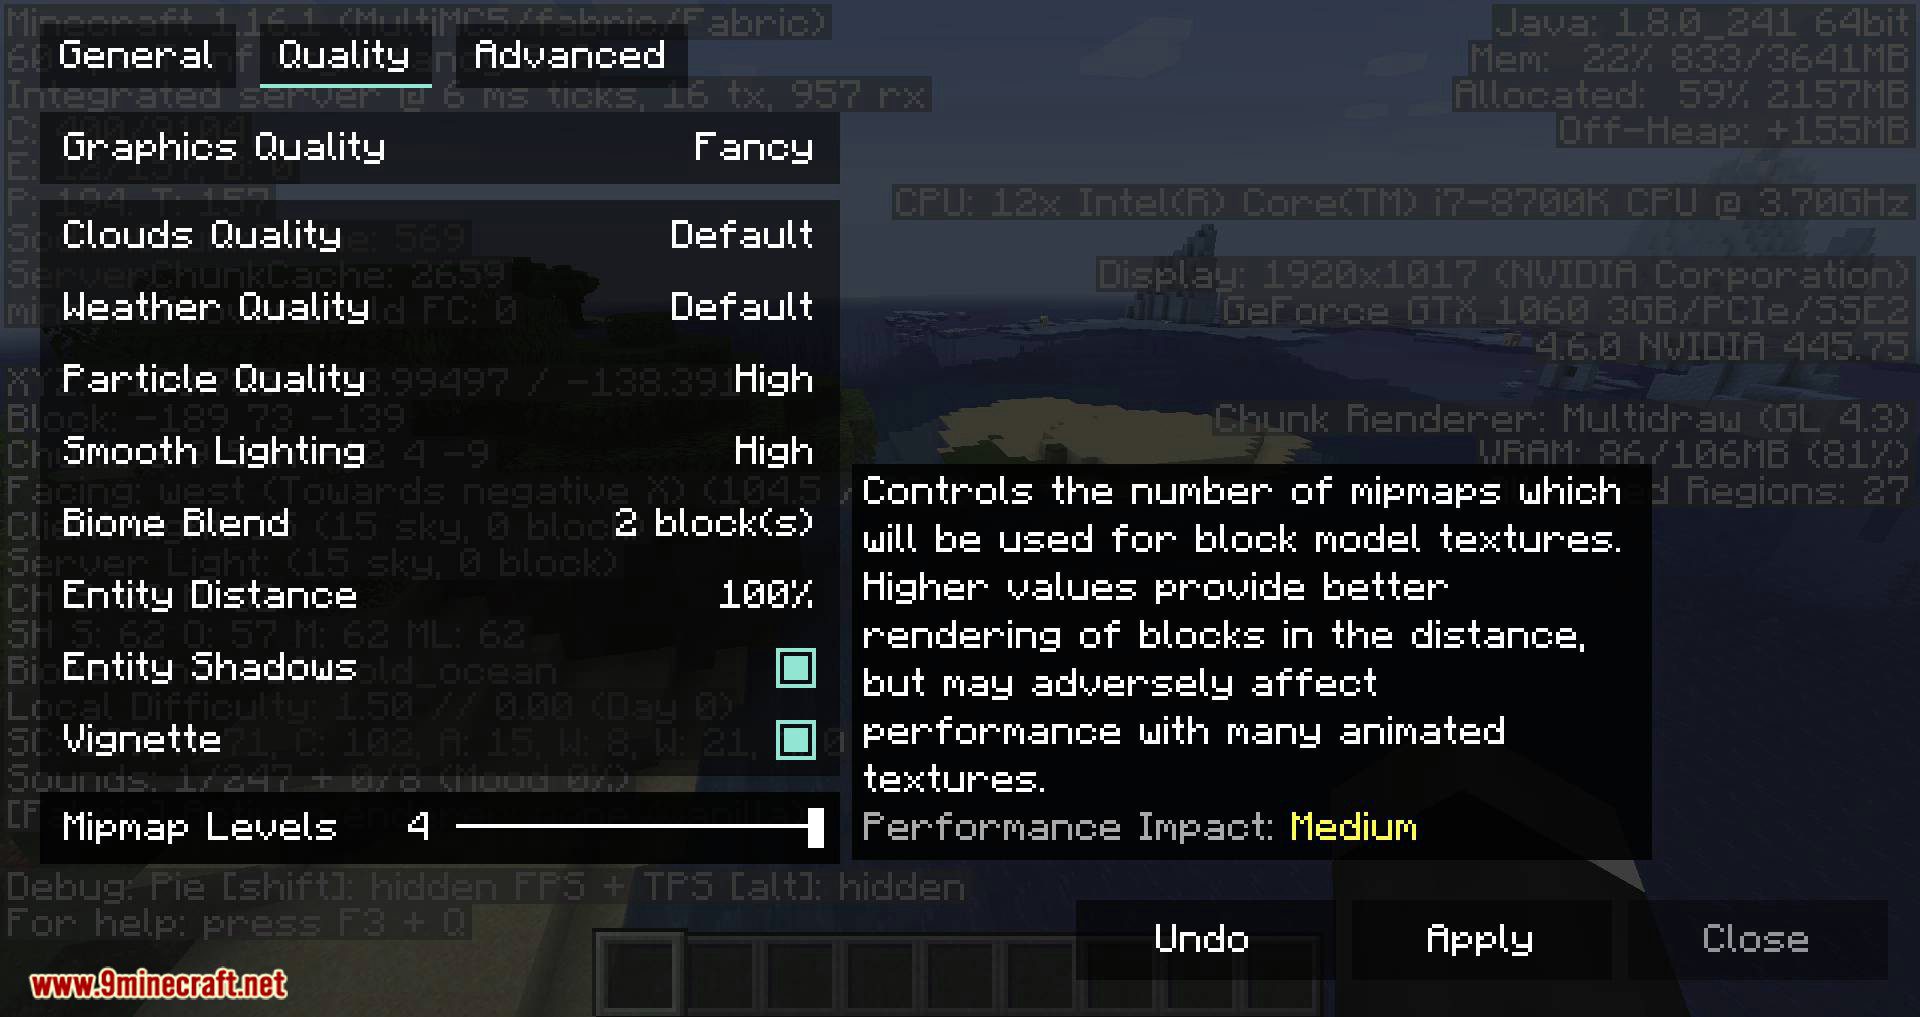 Sodium Mod (1.20.4, 1.19.4) - Boost Your FPS 